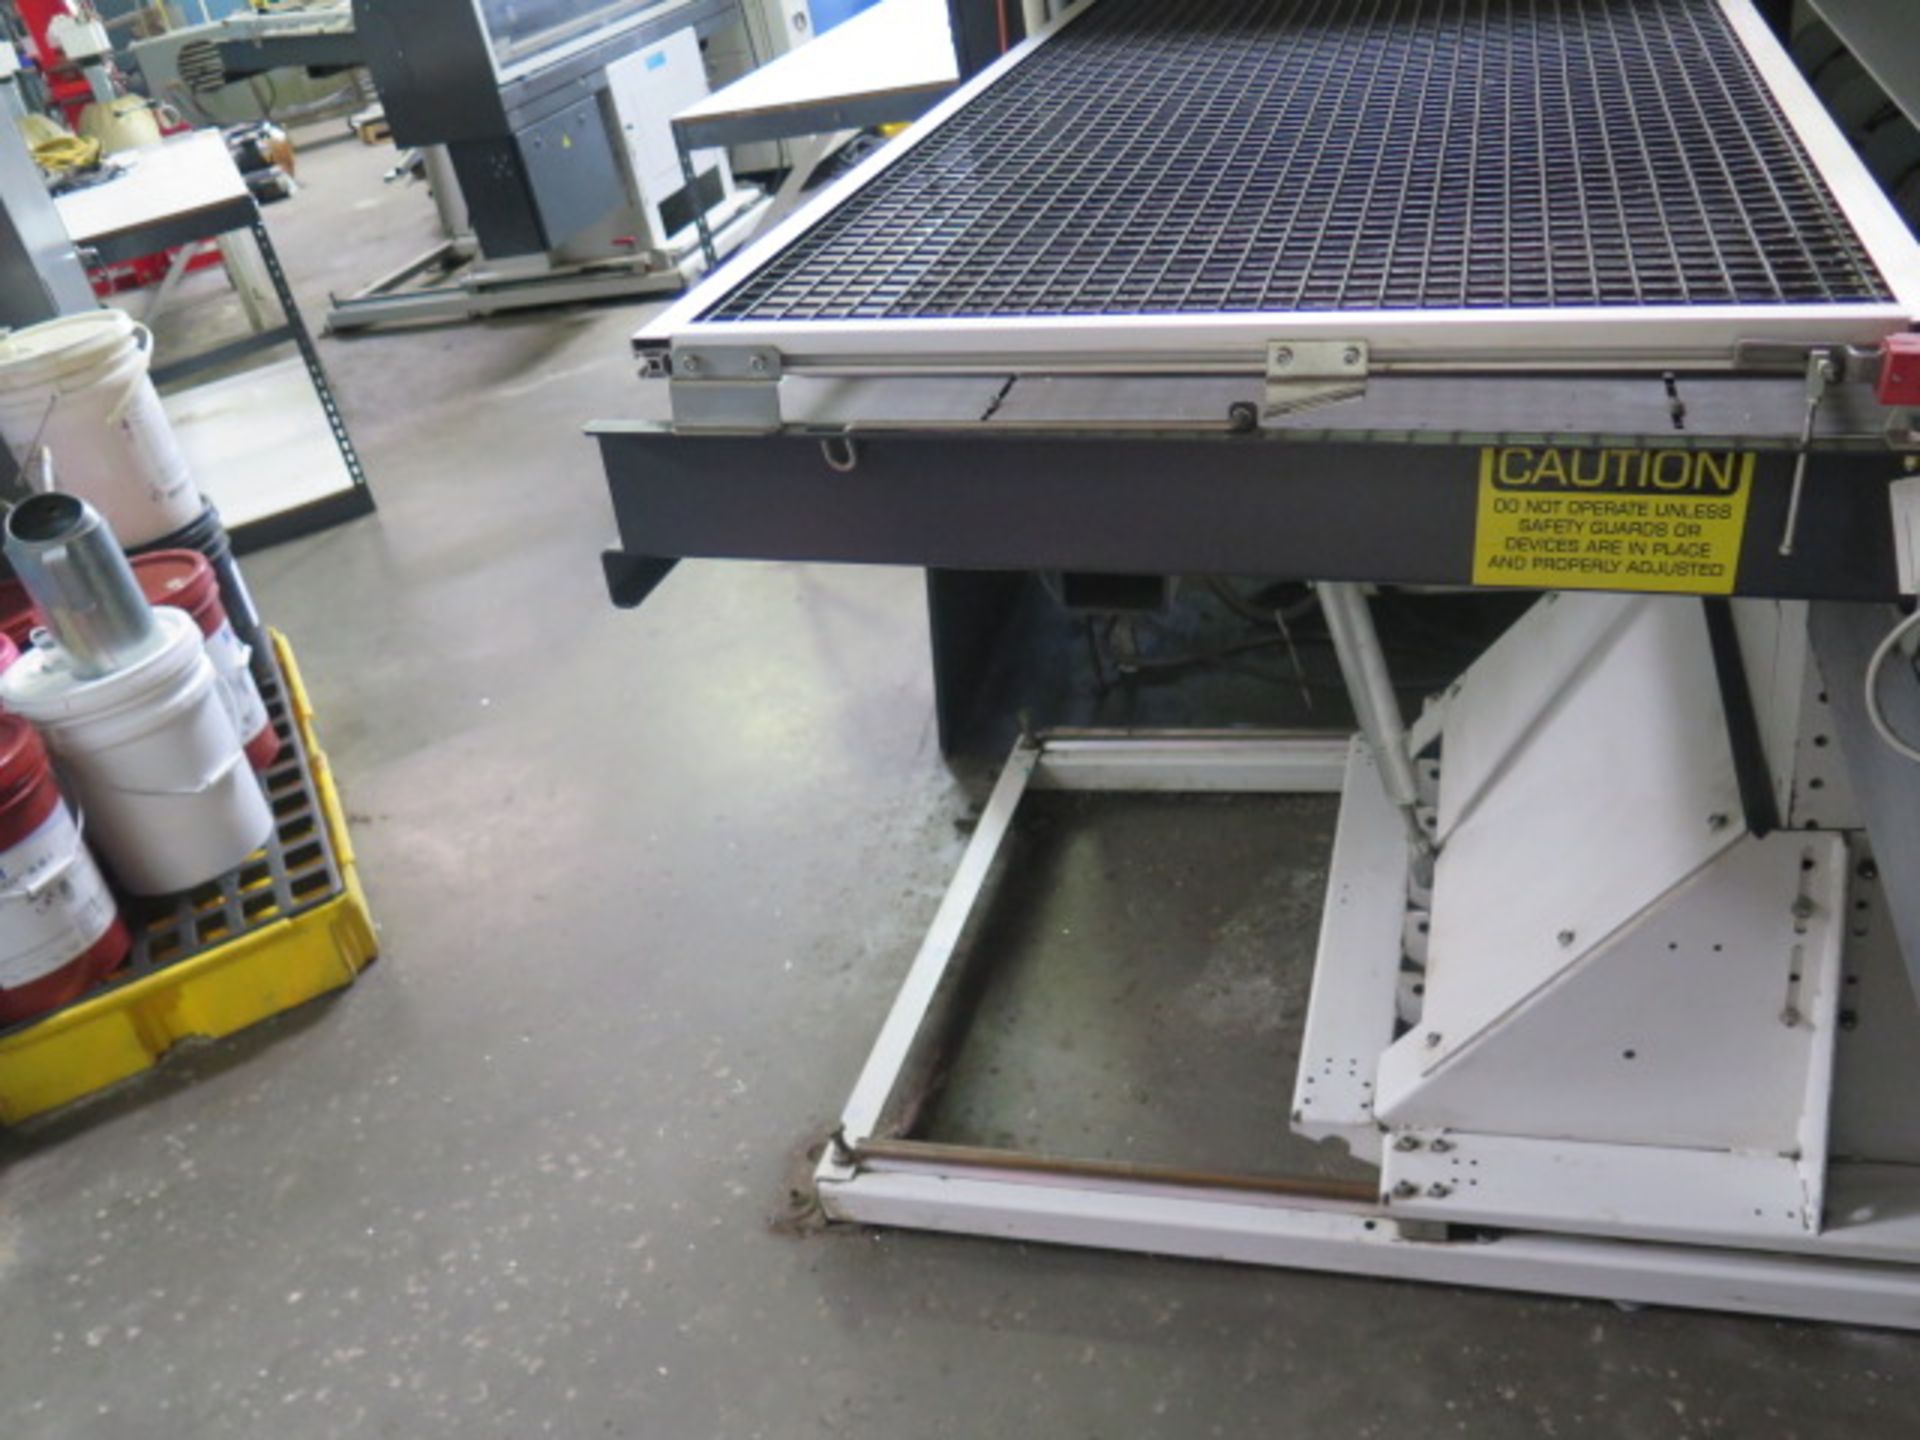 LNS Quick Load Servo S3 Automatic Bar Loader/Feeder (SOLD AS-IS - NO WARRANTY) - Image 4 of 7